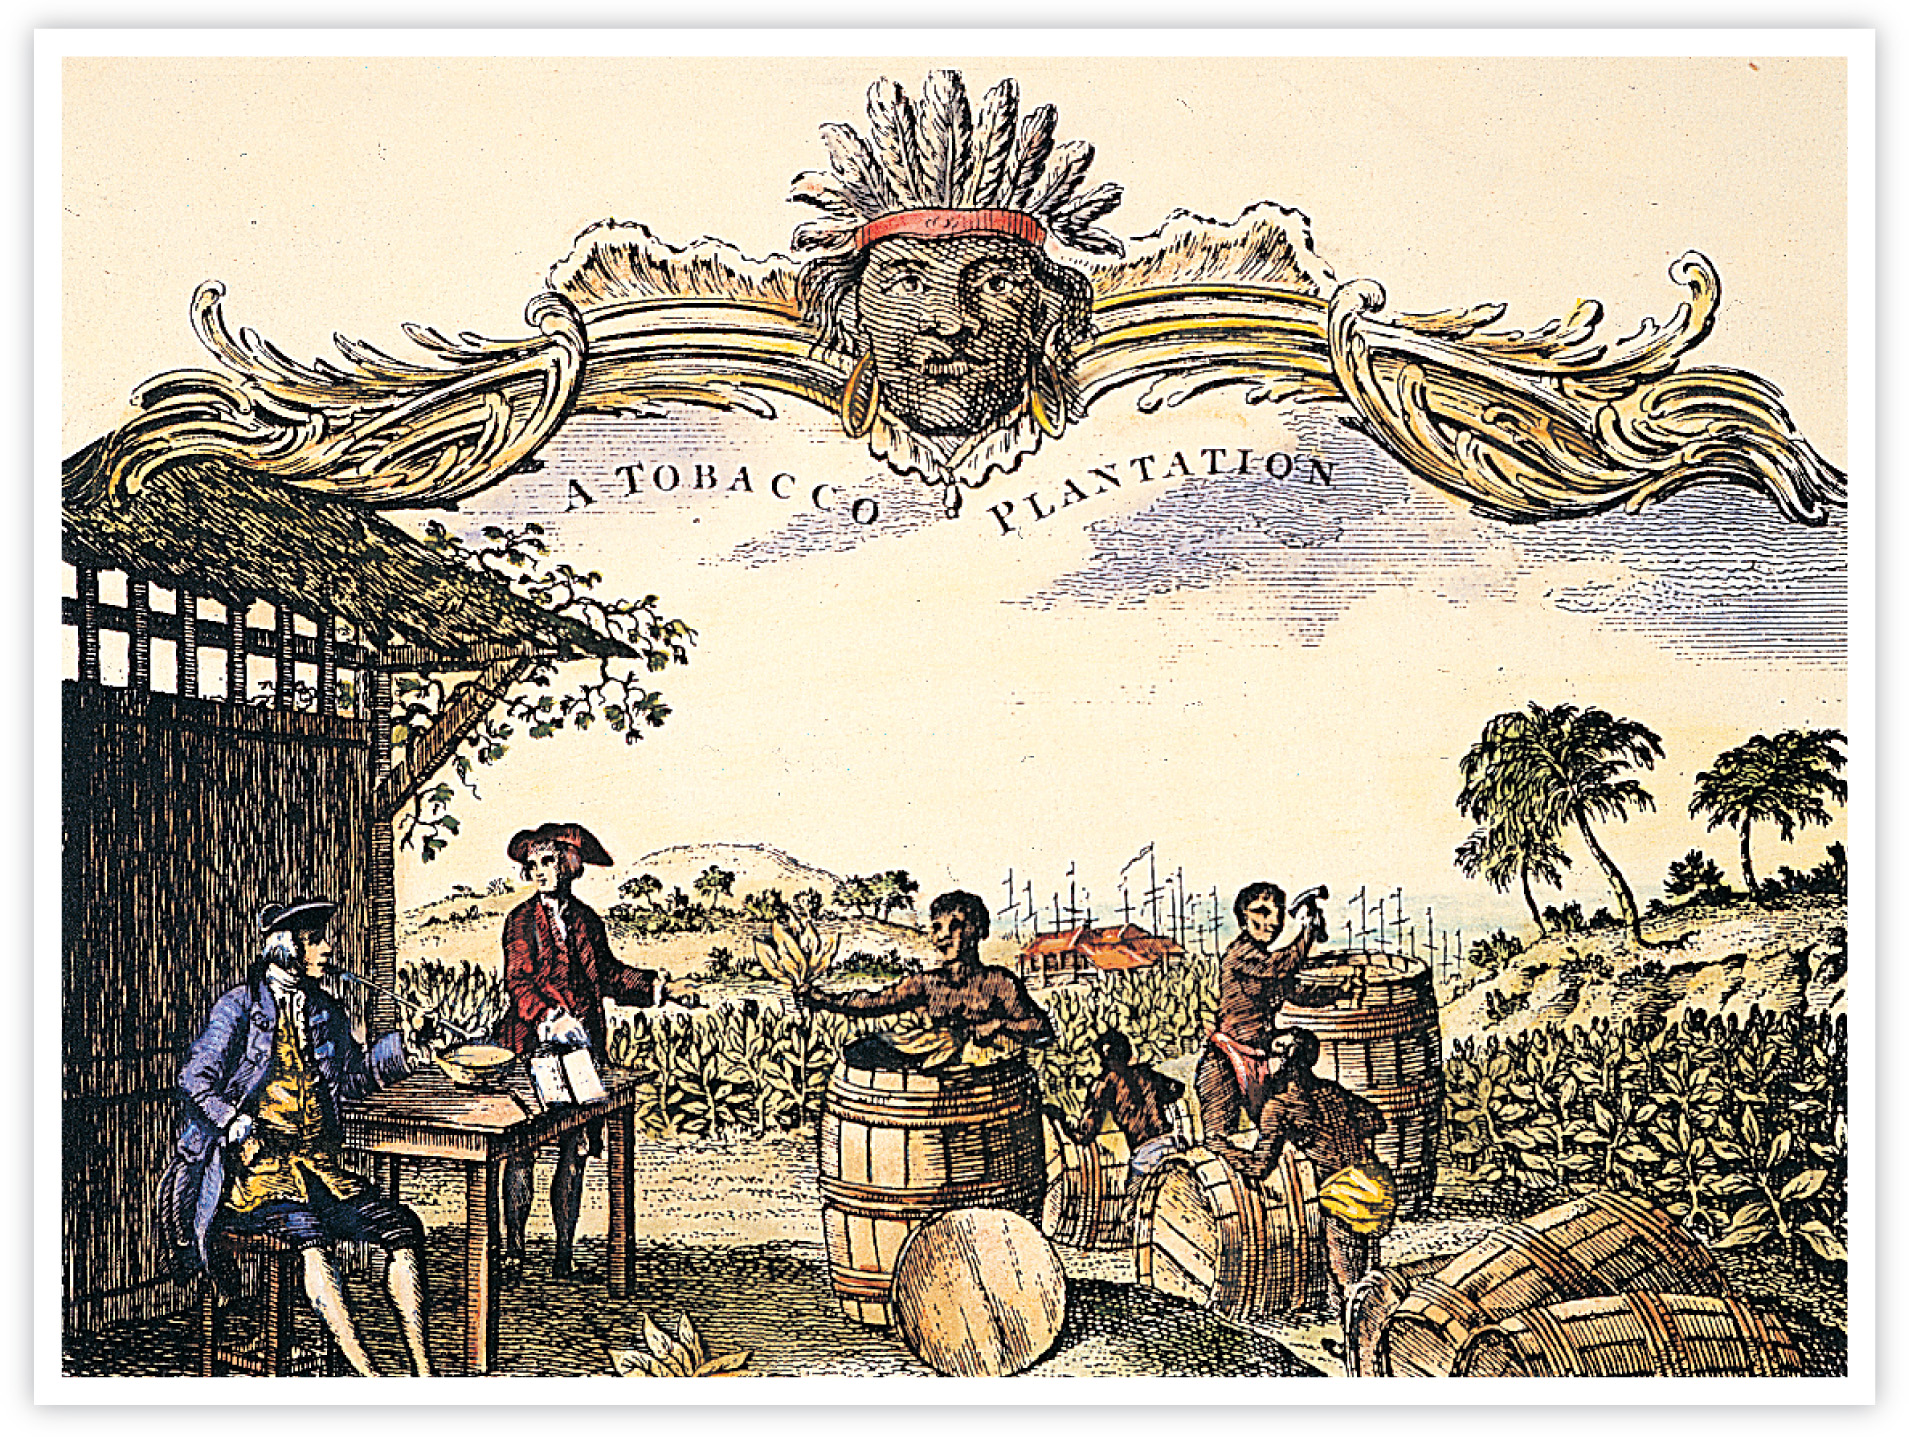 an engraving titled A Tobacco Plantation shows African-American slaves packing tobacco leaves in barrels.